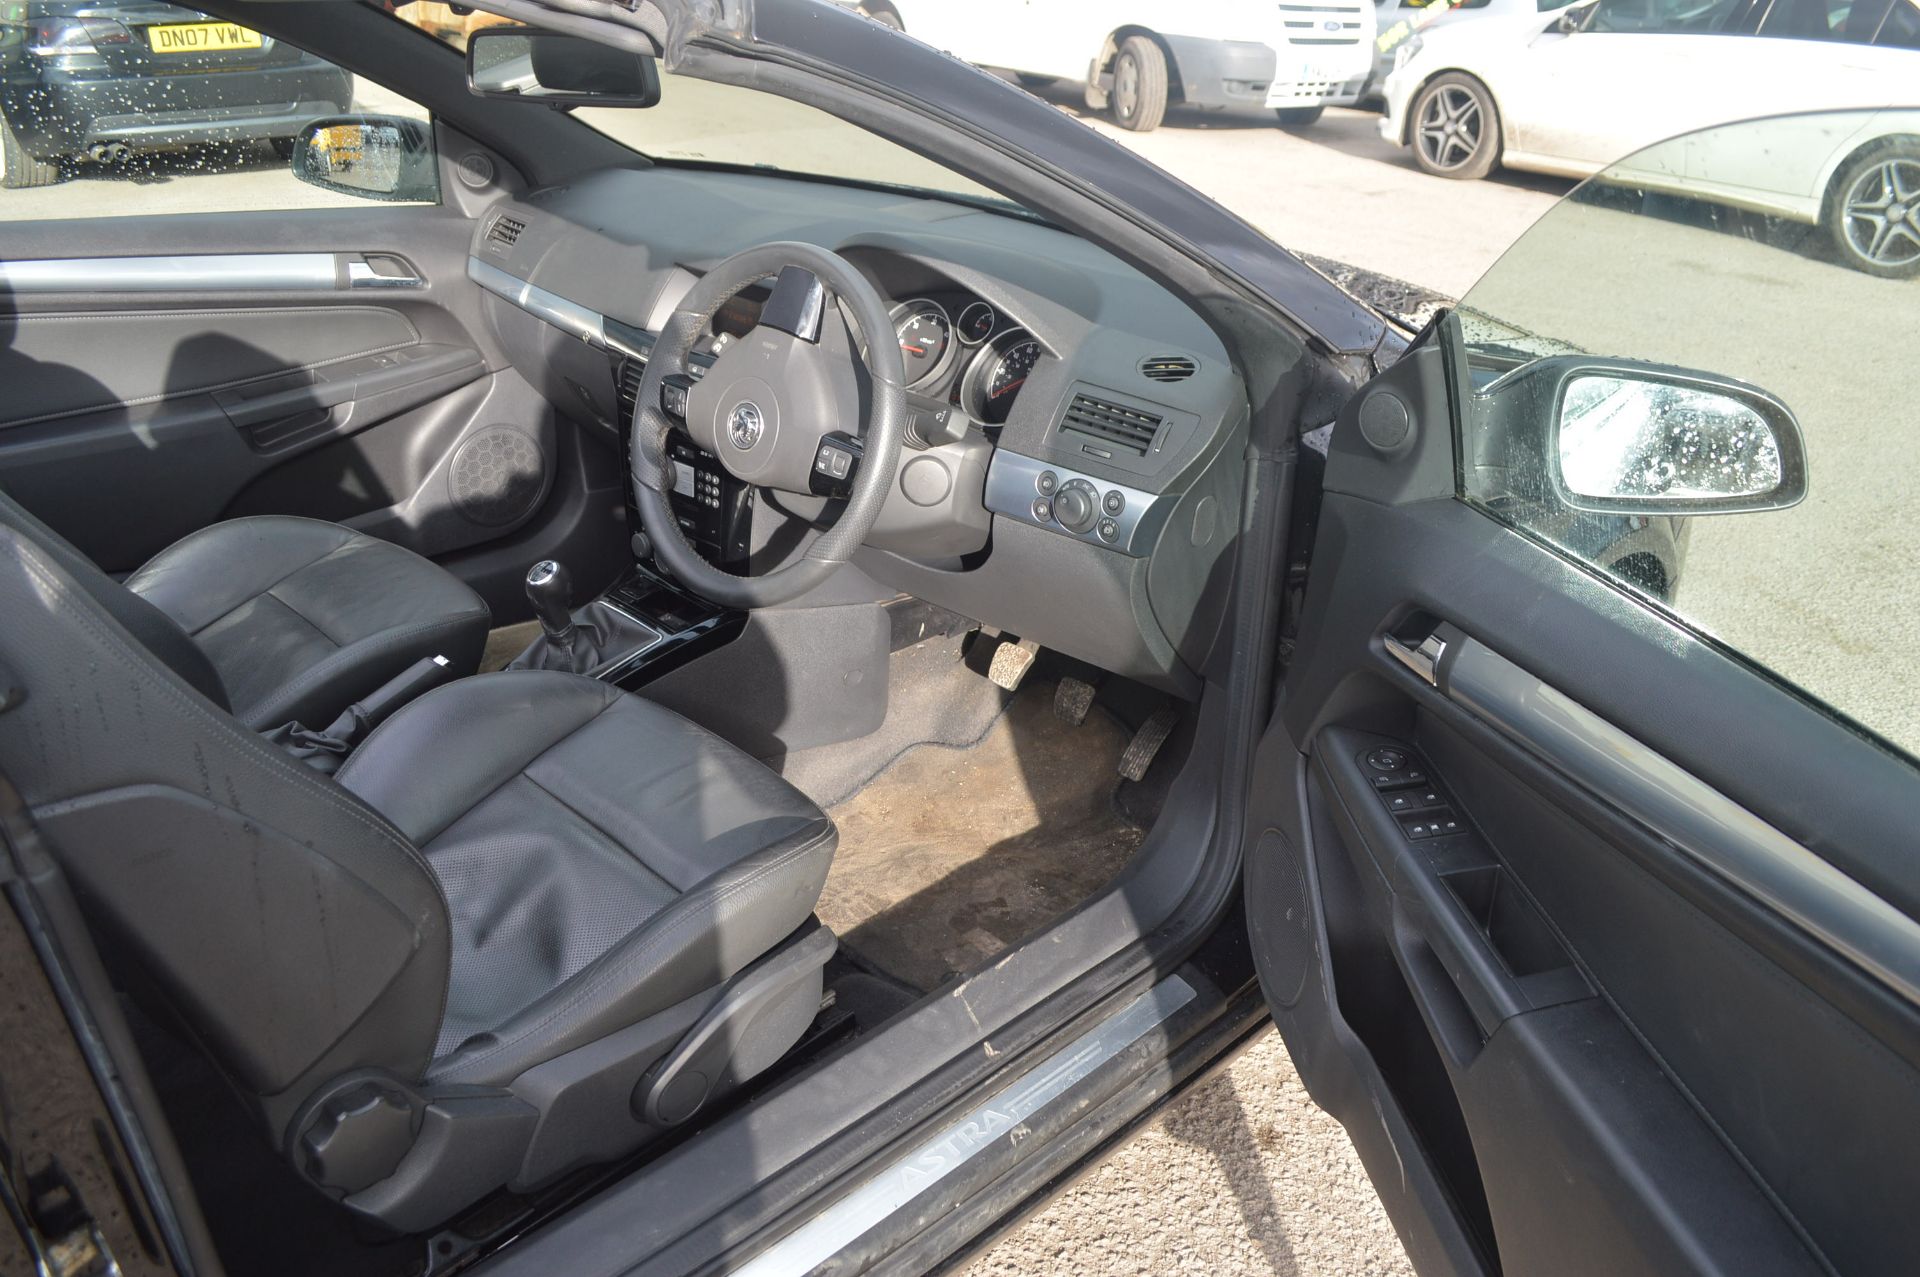 K - 2008/08 REG VAUXHALL ASTRA T-TOP DESIGN CDTI - ROOF CAN BE PUT DOWN/UP WITH THE KEY   DATE OF - Image 11 of 22